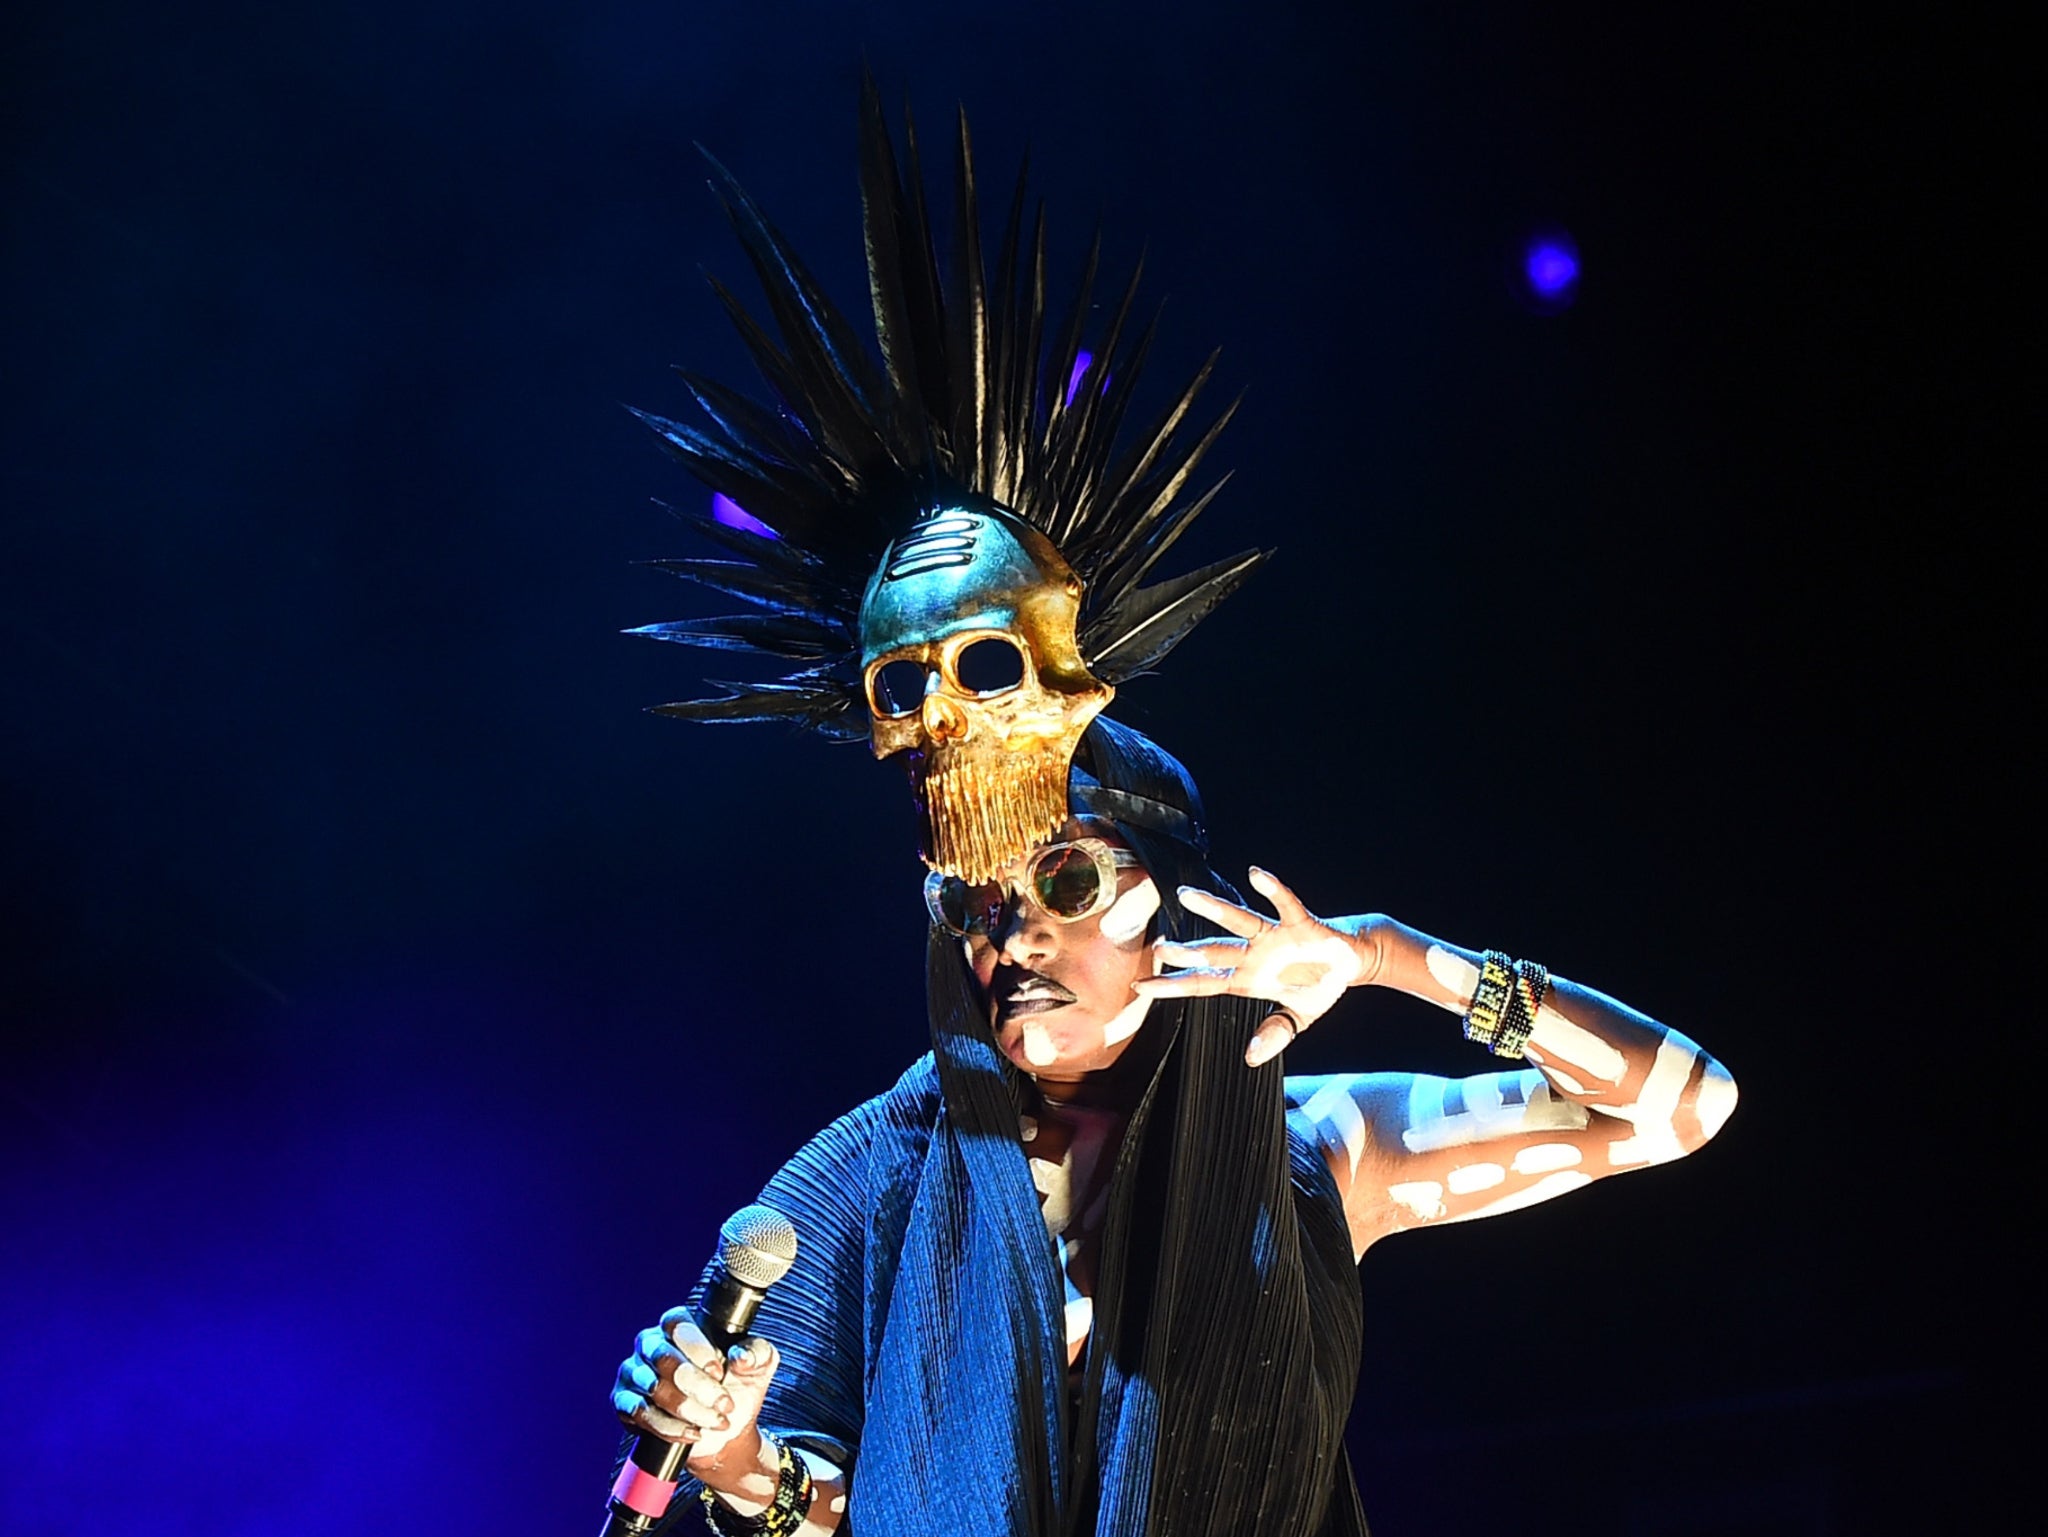 US disco legend Grace Jones, who many Bluedot ticket-holders will now be unable to see